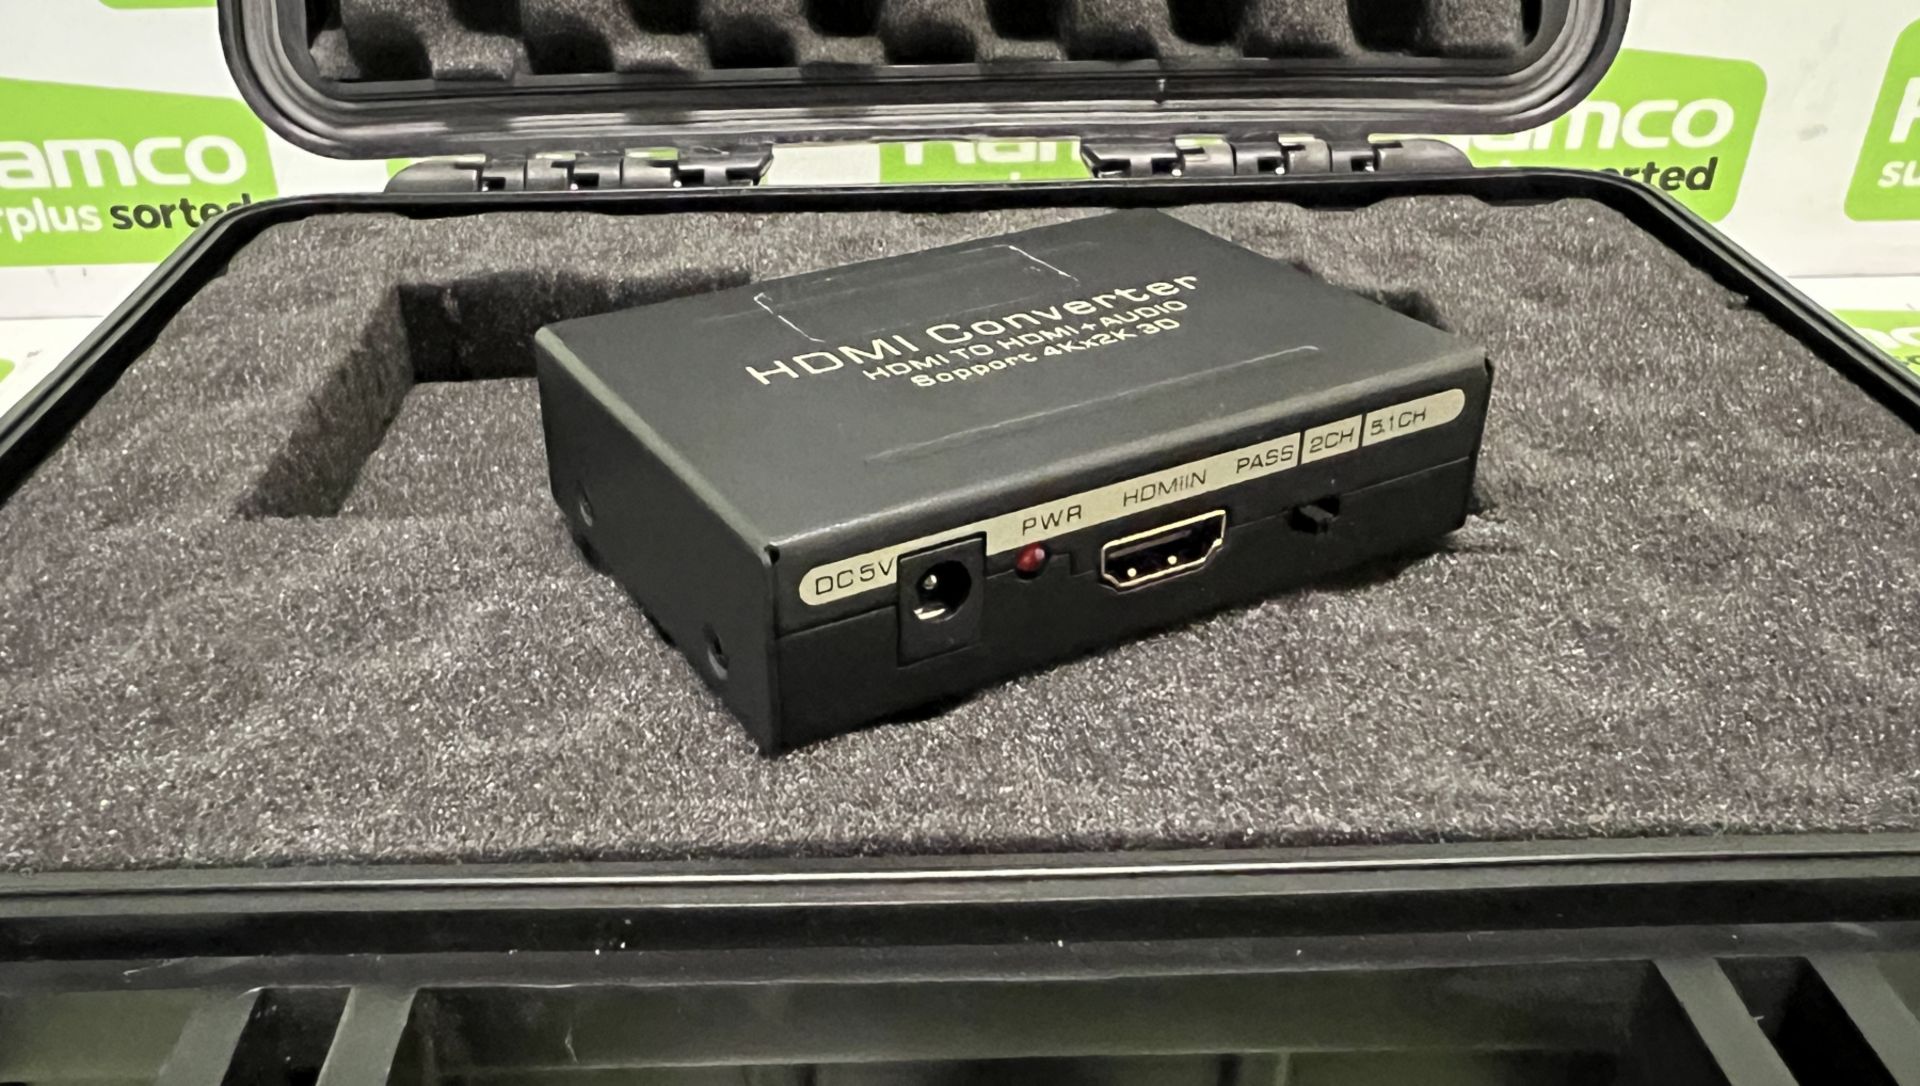 HDMI converter - HDMI to HDMI + audio support 4K x 2K 3D in foam padded case - Image 3 of 4